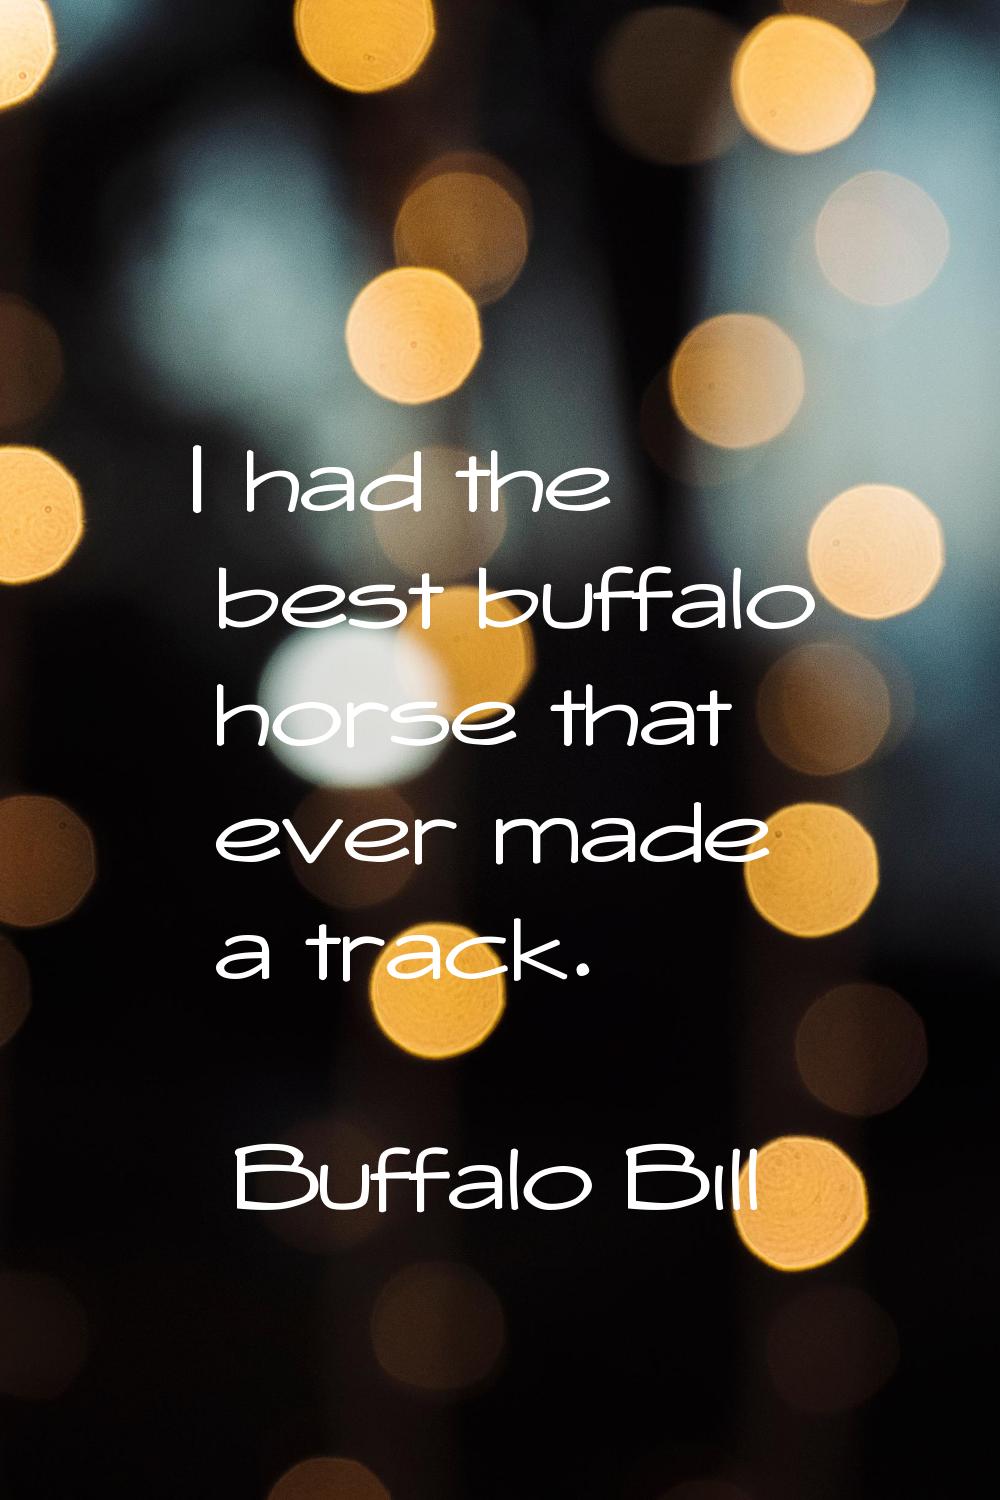 I had the best buffalo horse that ever made a track.